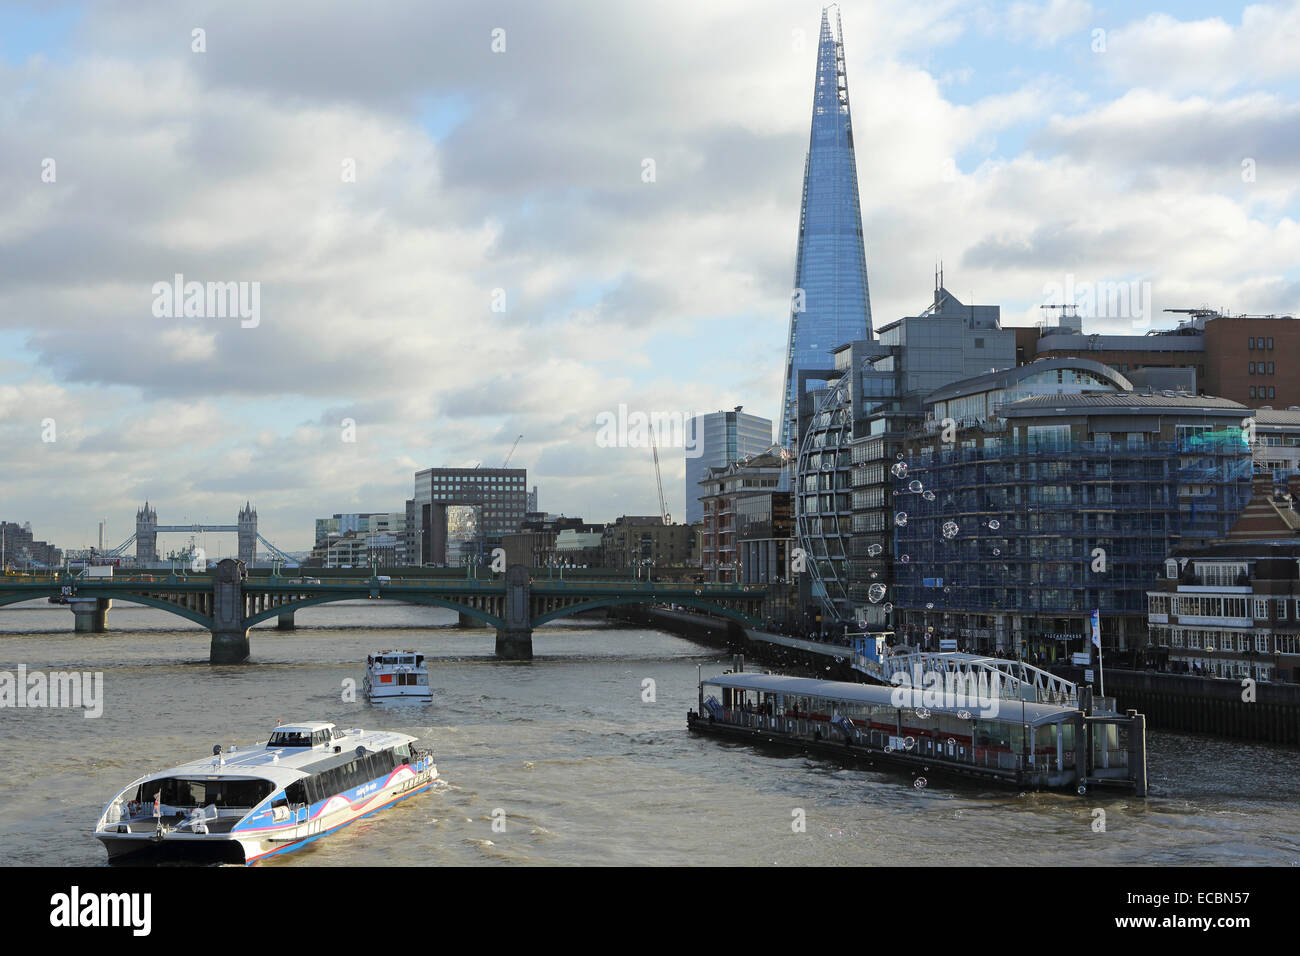 The South Bank of the River Thames in London, England. The Shard dominates the skyline while boats navigate the river. Stock Photo